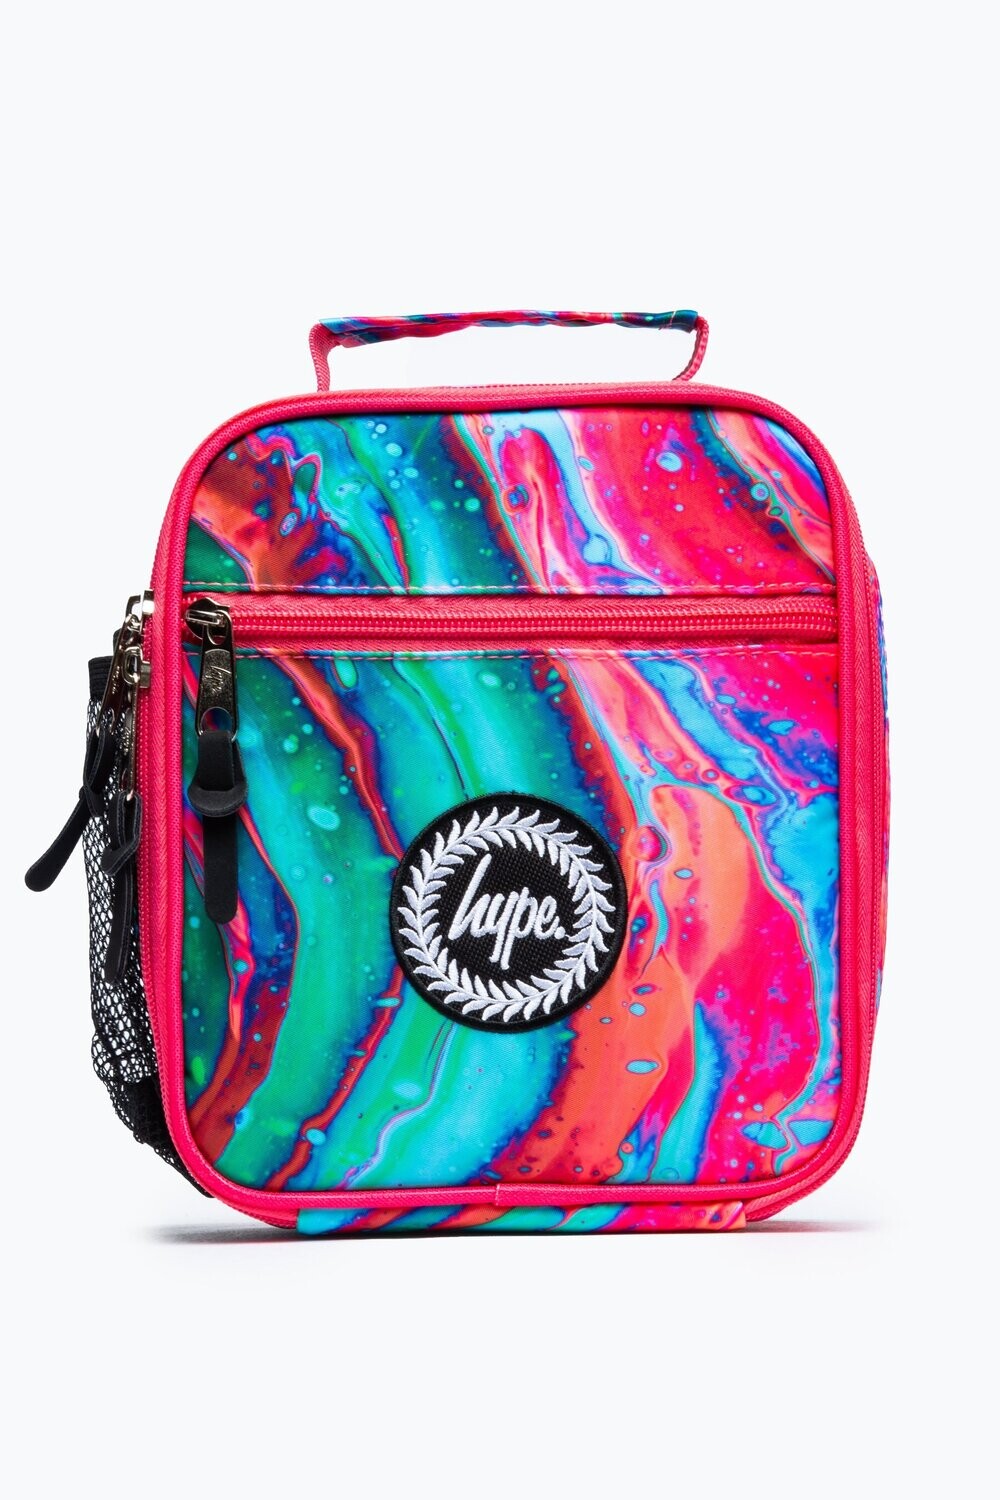 HYPE HIGHLIGHTER MARBLE LUNCH BAG - One Size / Multi